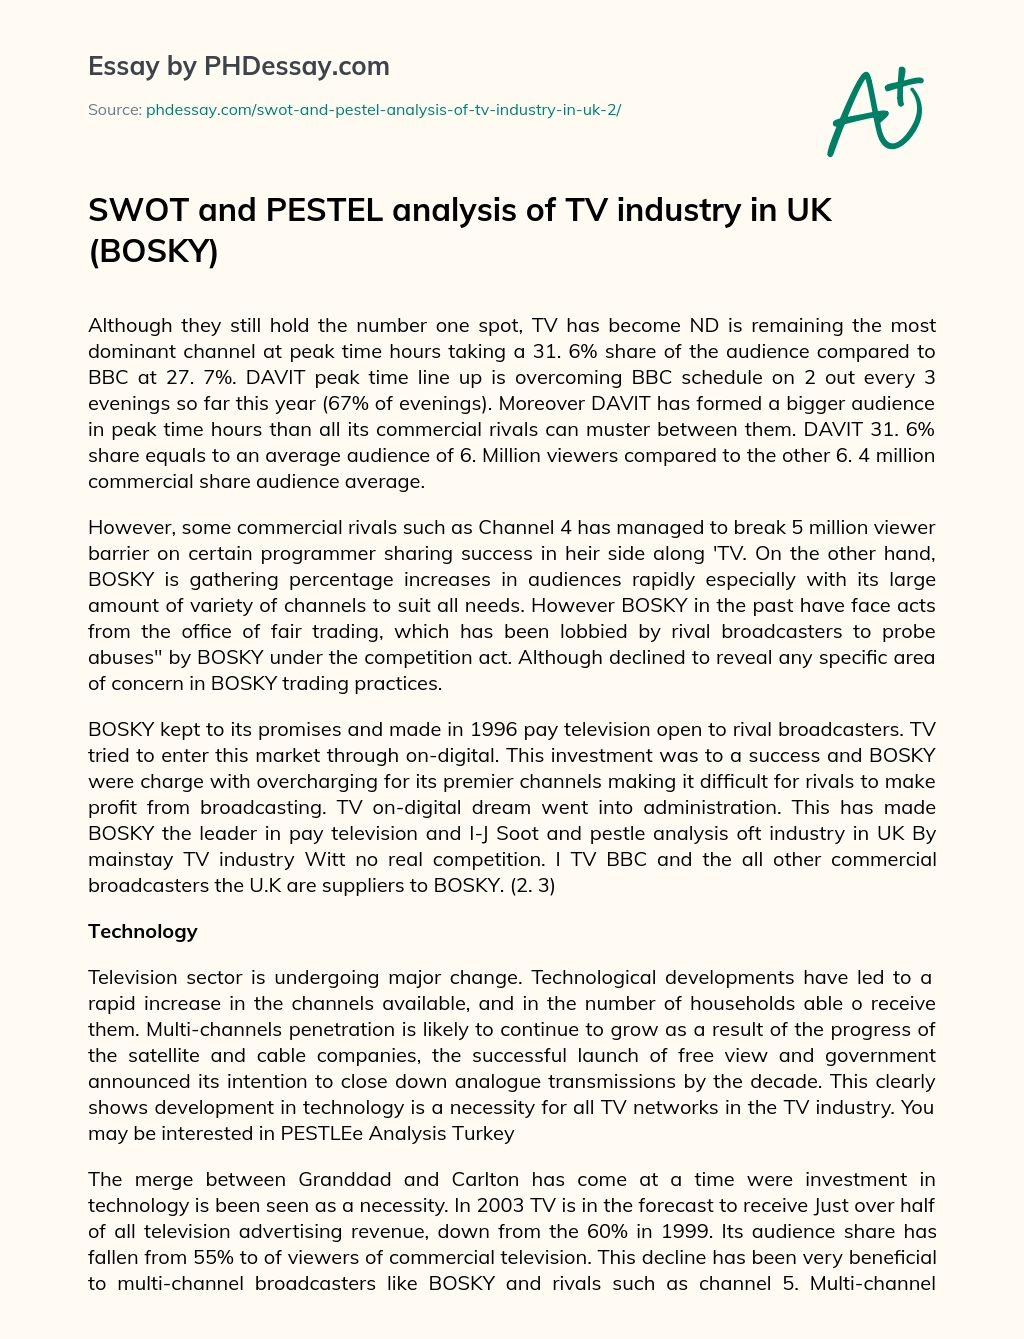 SWOT and PESTEL analysis of TV industry in UK (BOSKY) essay